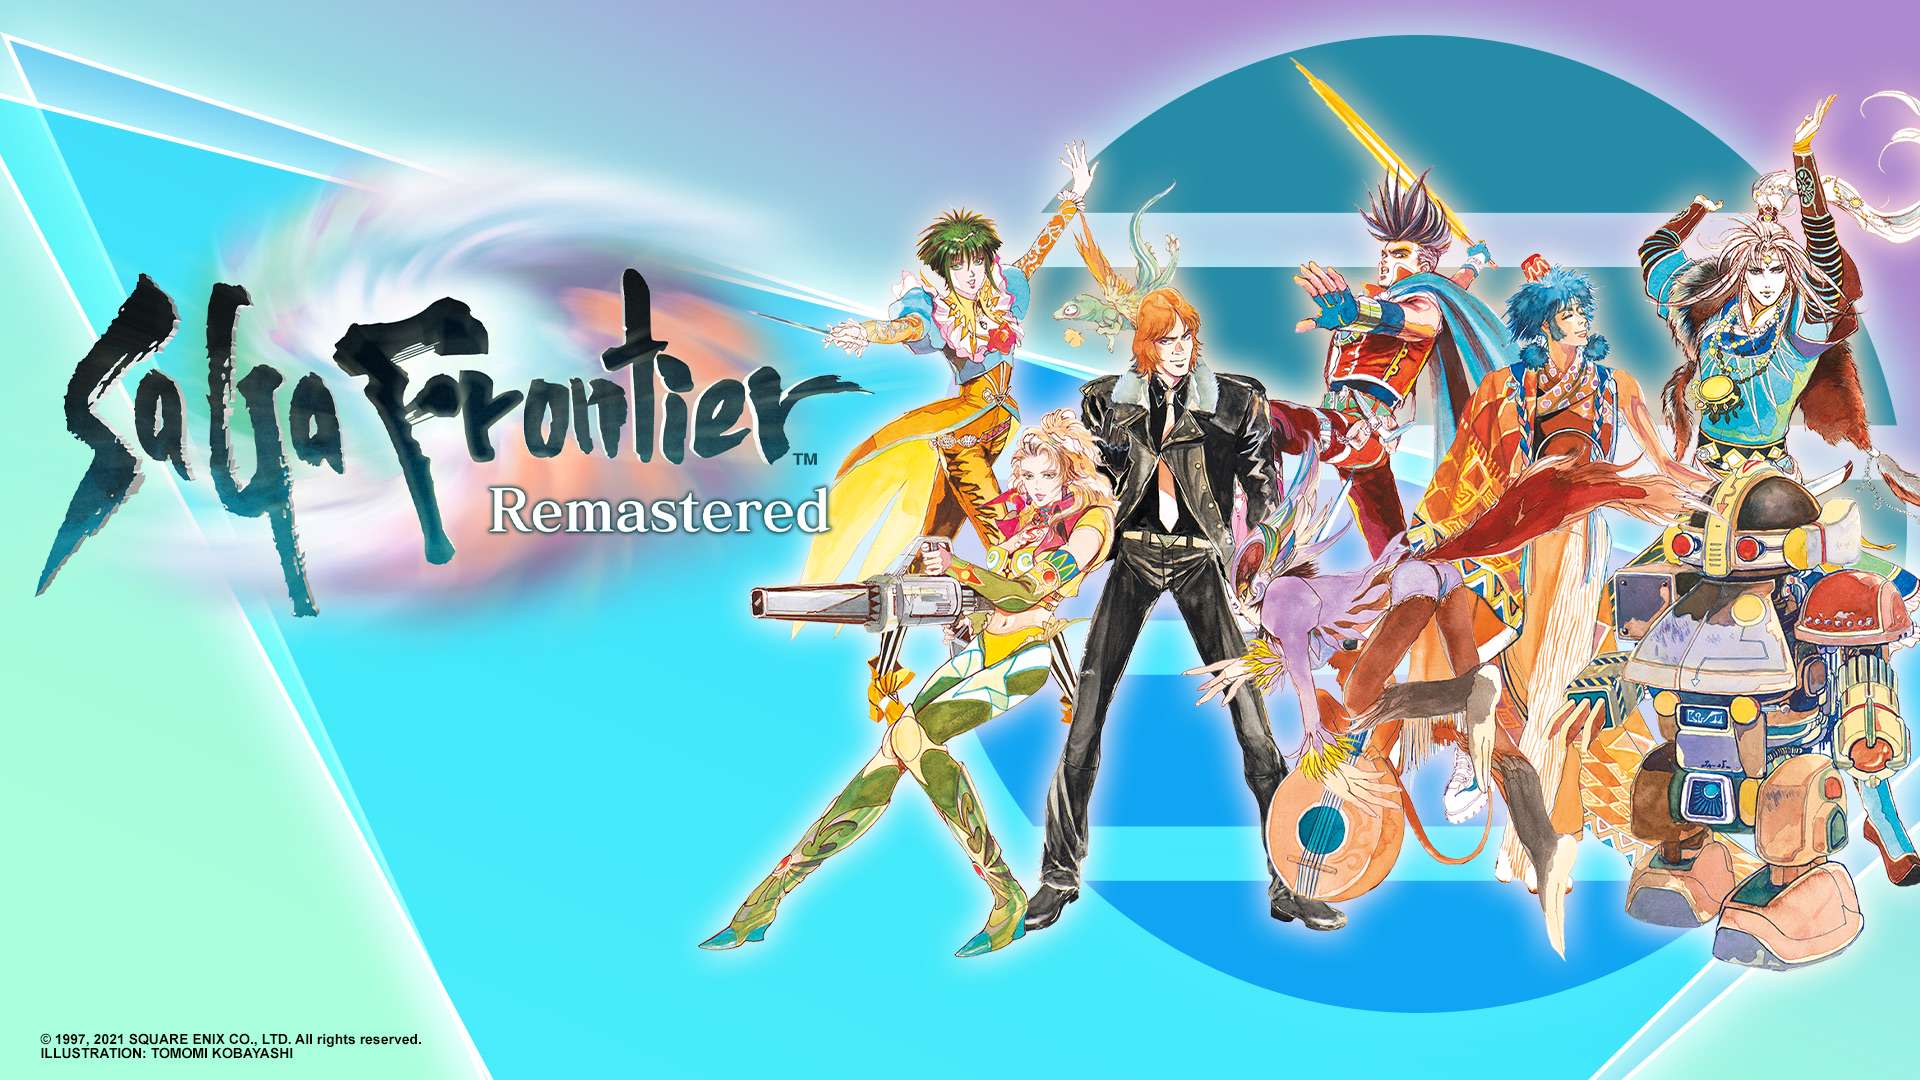 saga frontier remastered red guide